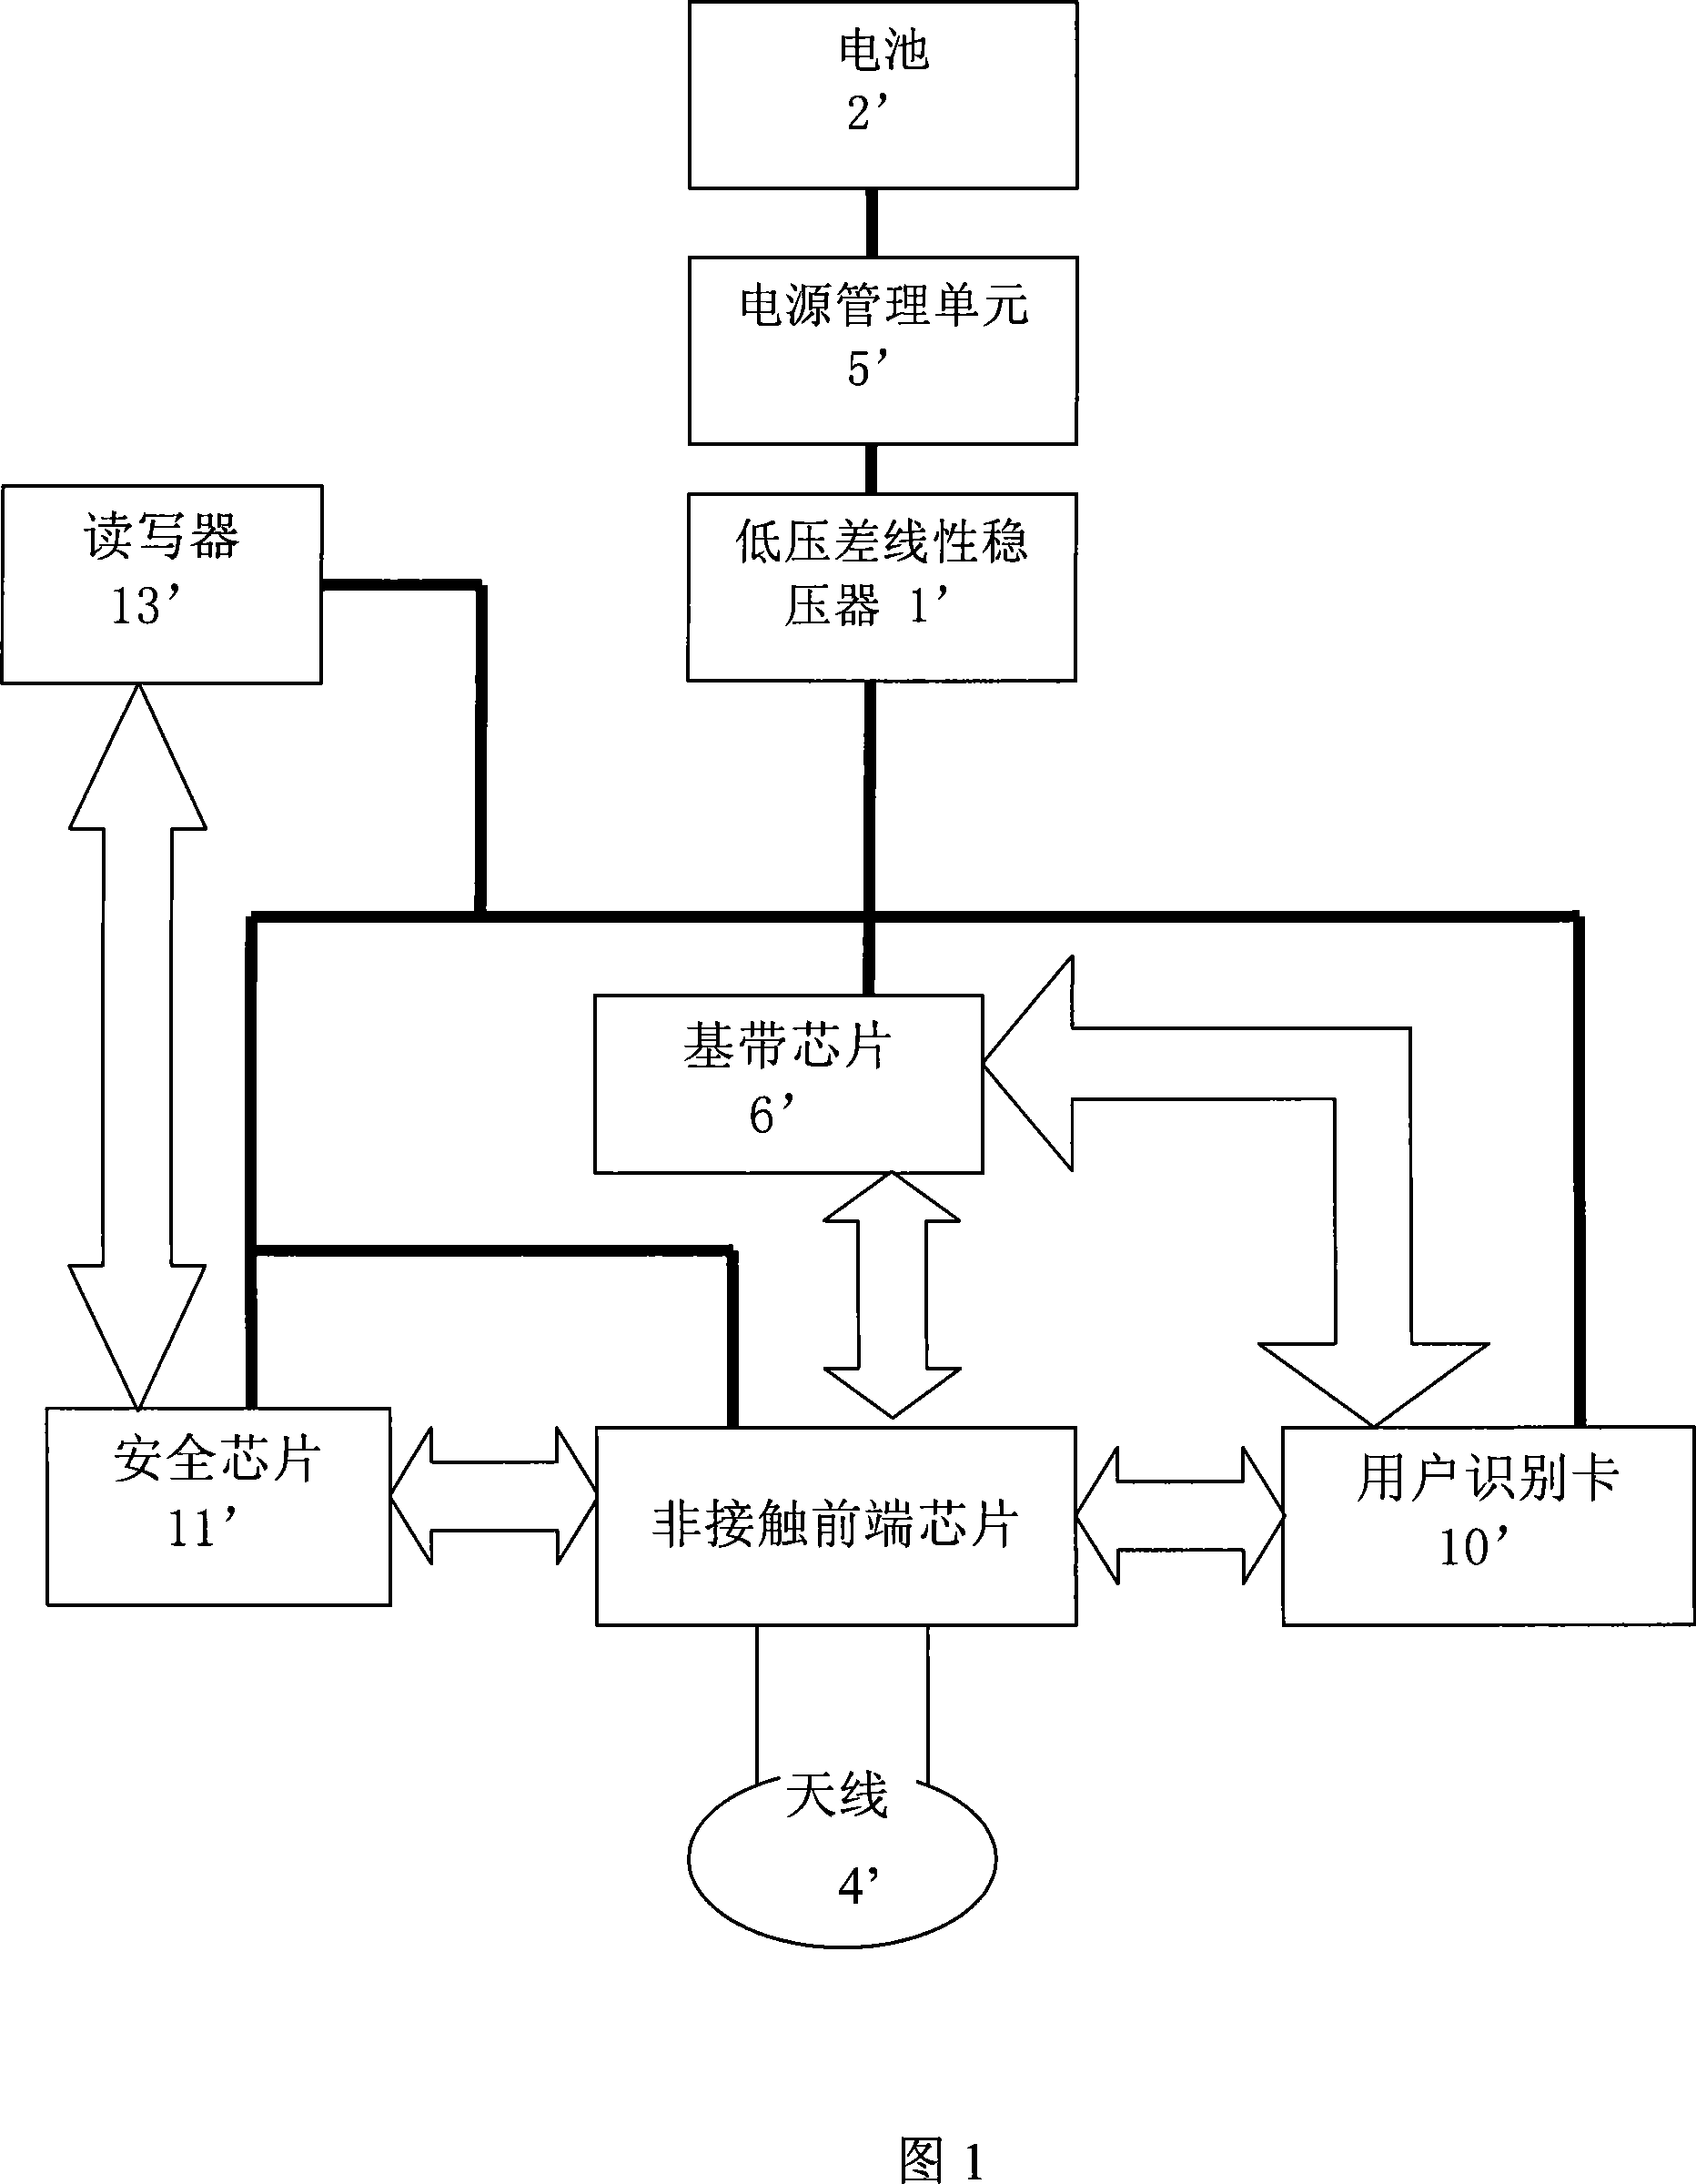 Near-field communications terminal supply unit and method